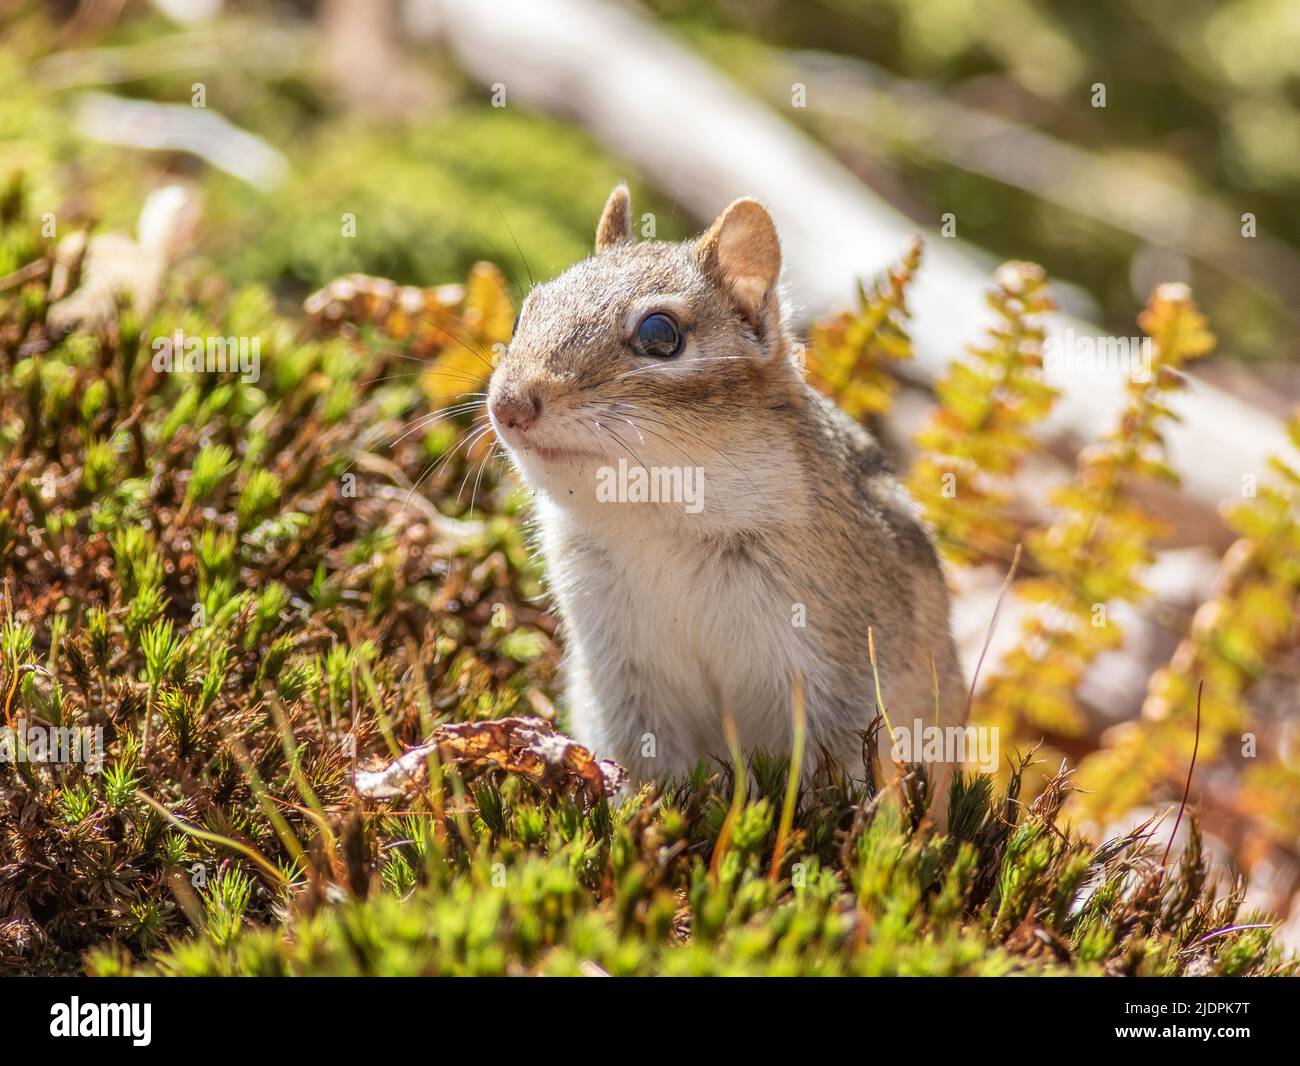 An Eastern Chipmunk watching from a moss-covered log in the forest Stock Photo